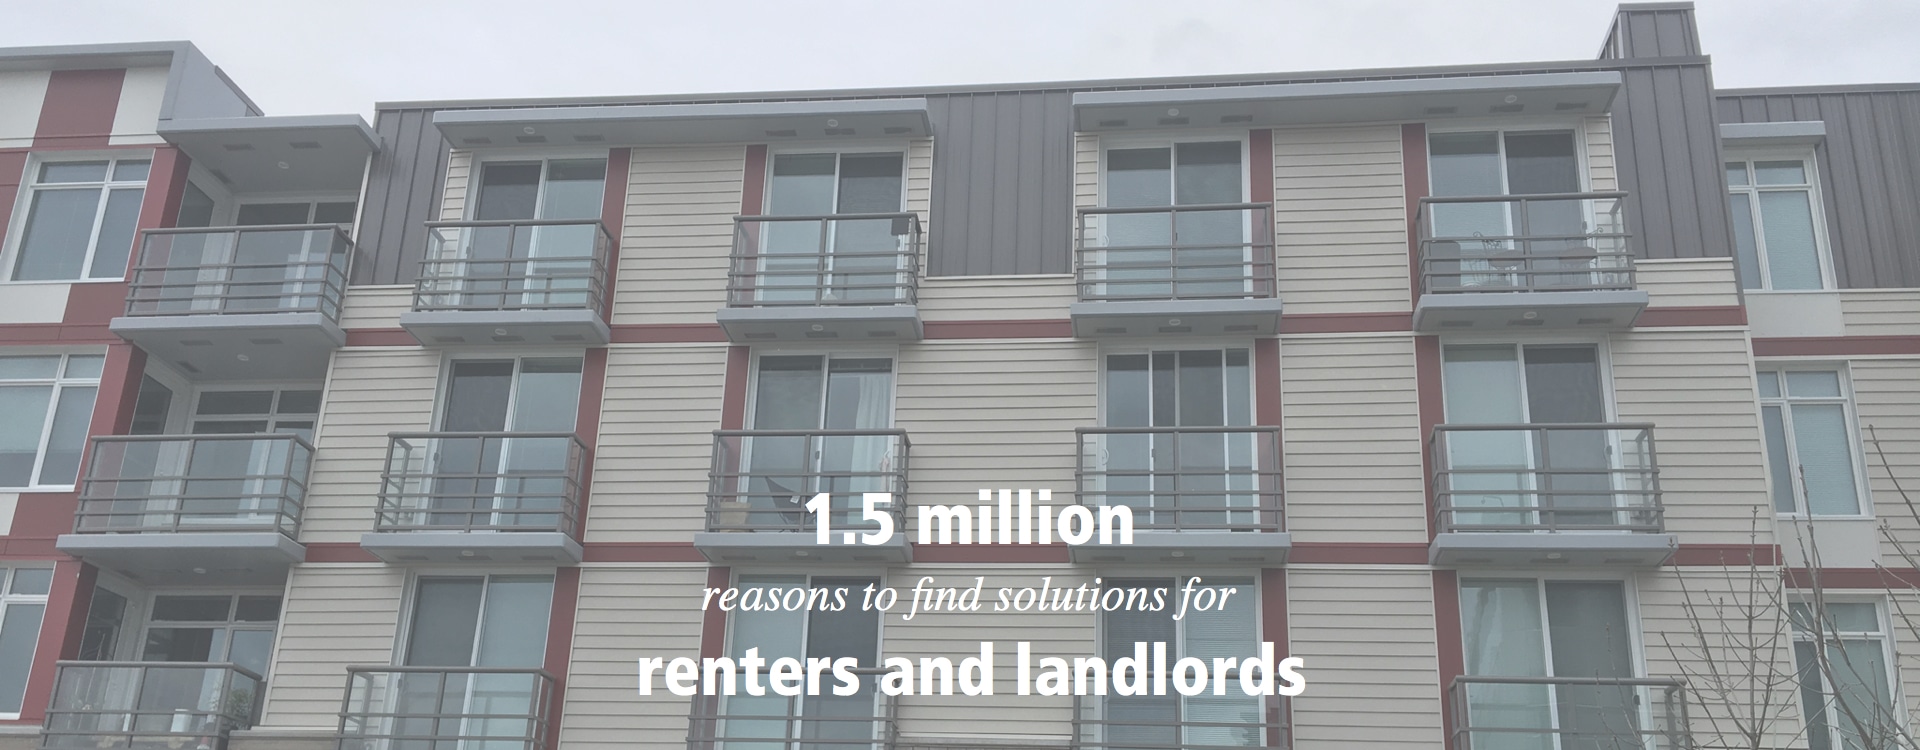 1.5 million reasons to find solutions for renters and landlords